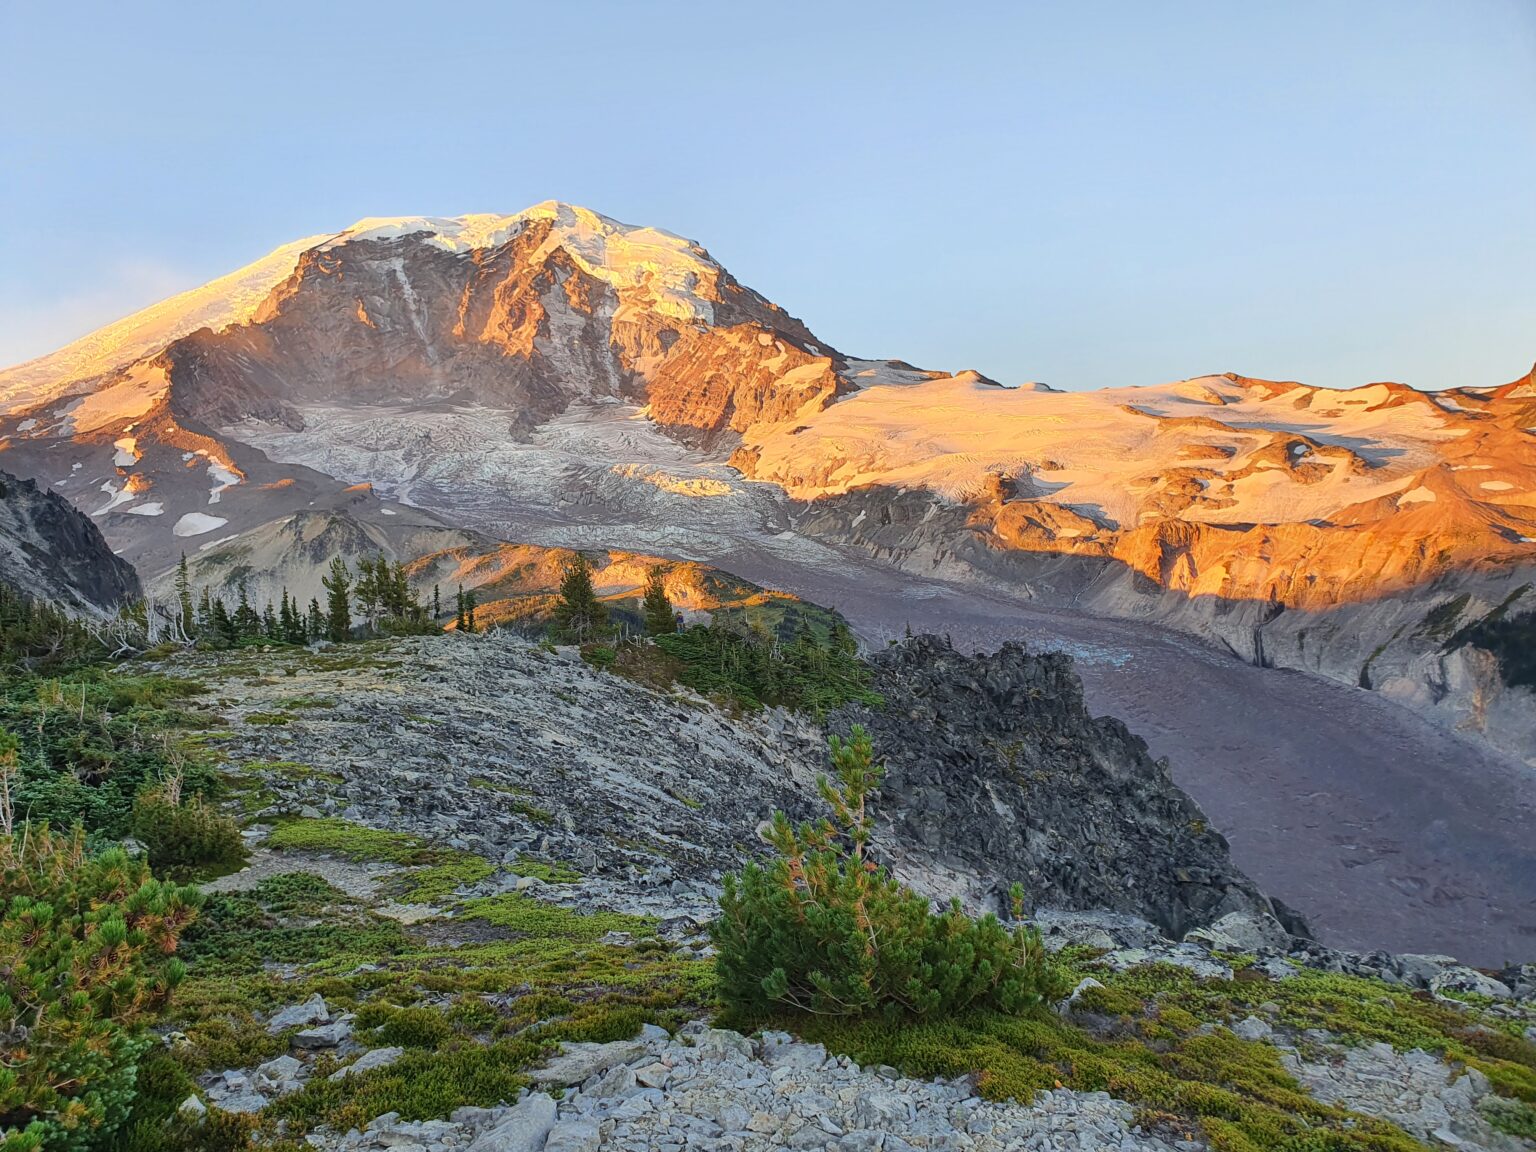 Looking out at Mount Rainier and the Carbon Glacier from Moraine Park